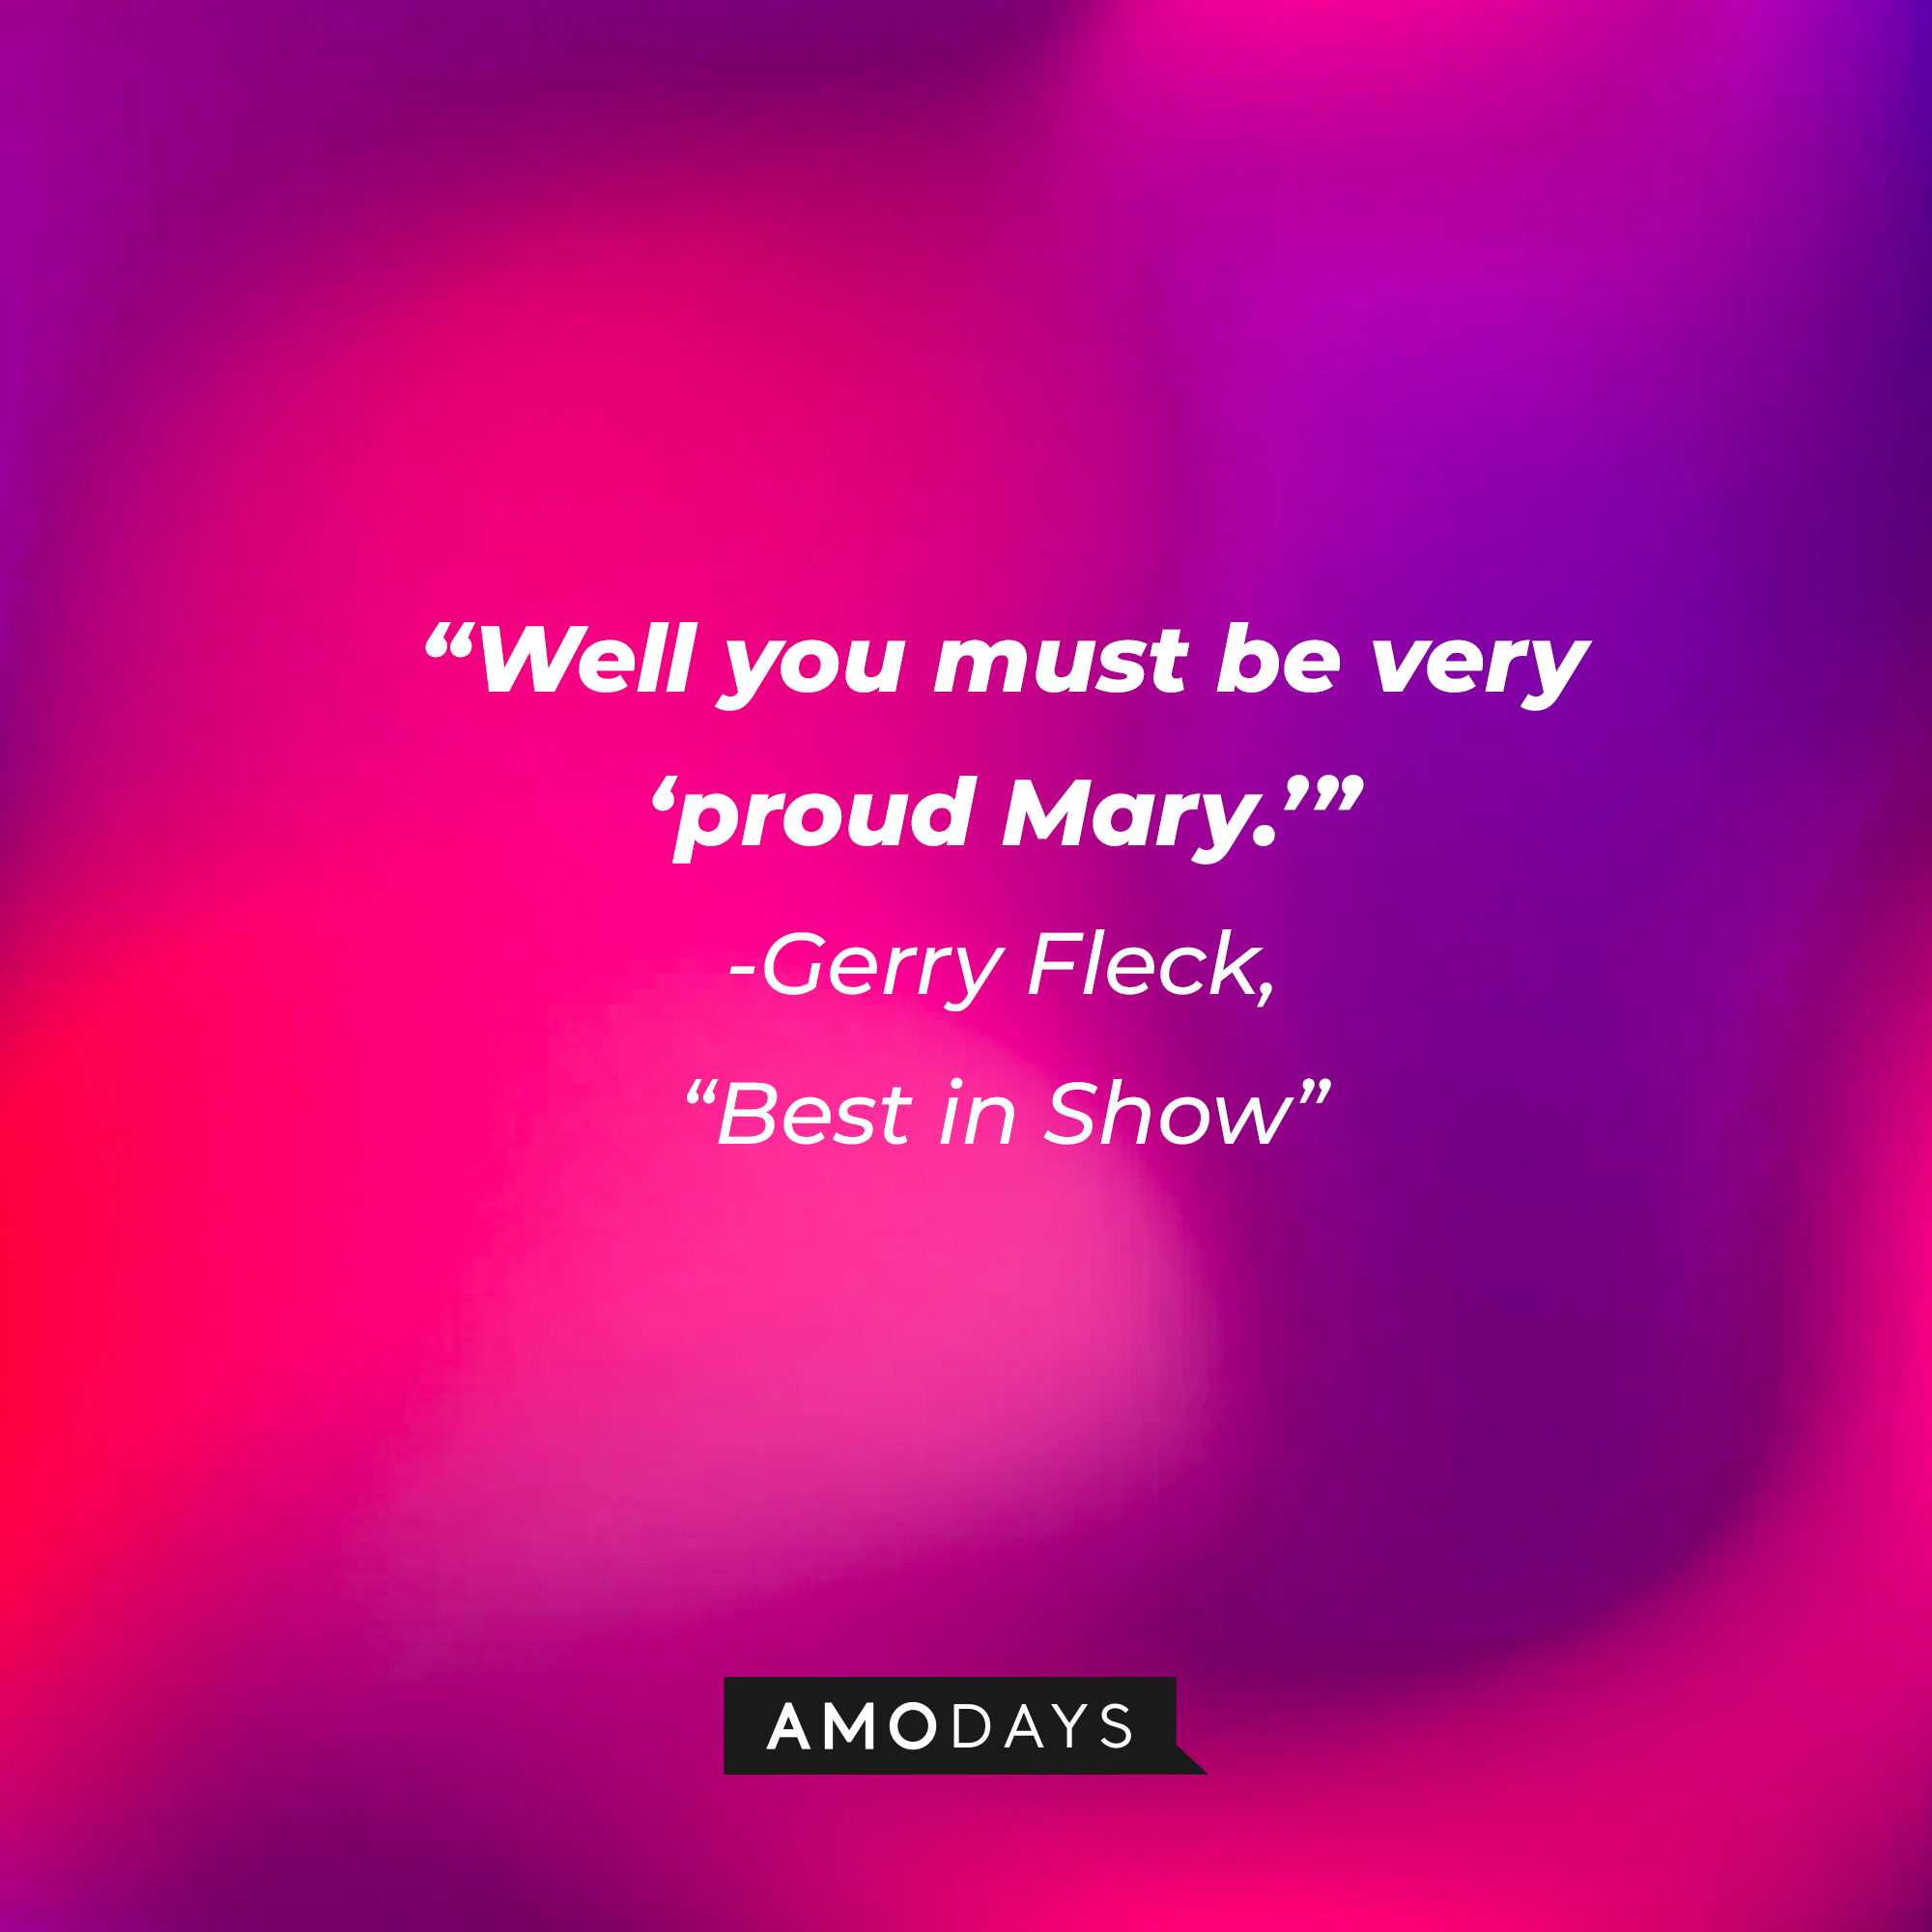 Gerry Fleck's quote in "Best in Show:" "Well you must be very "proud Mary.’" | Source: AmoDays